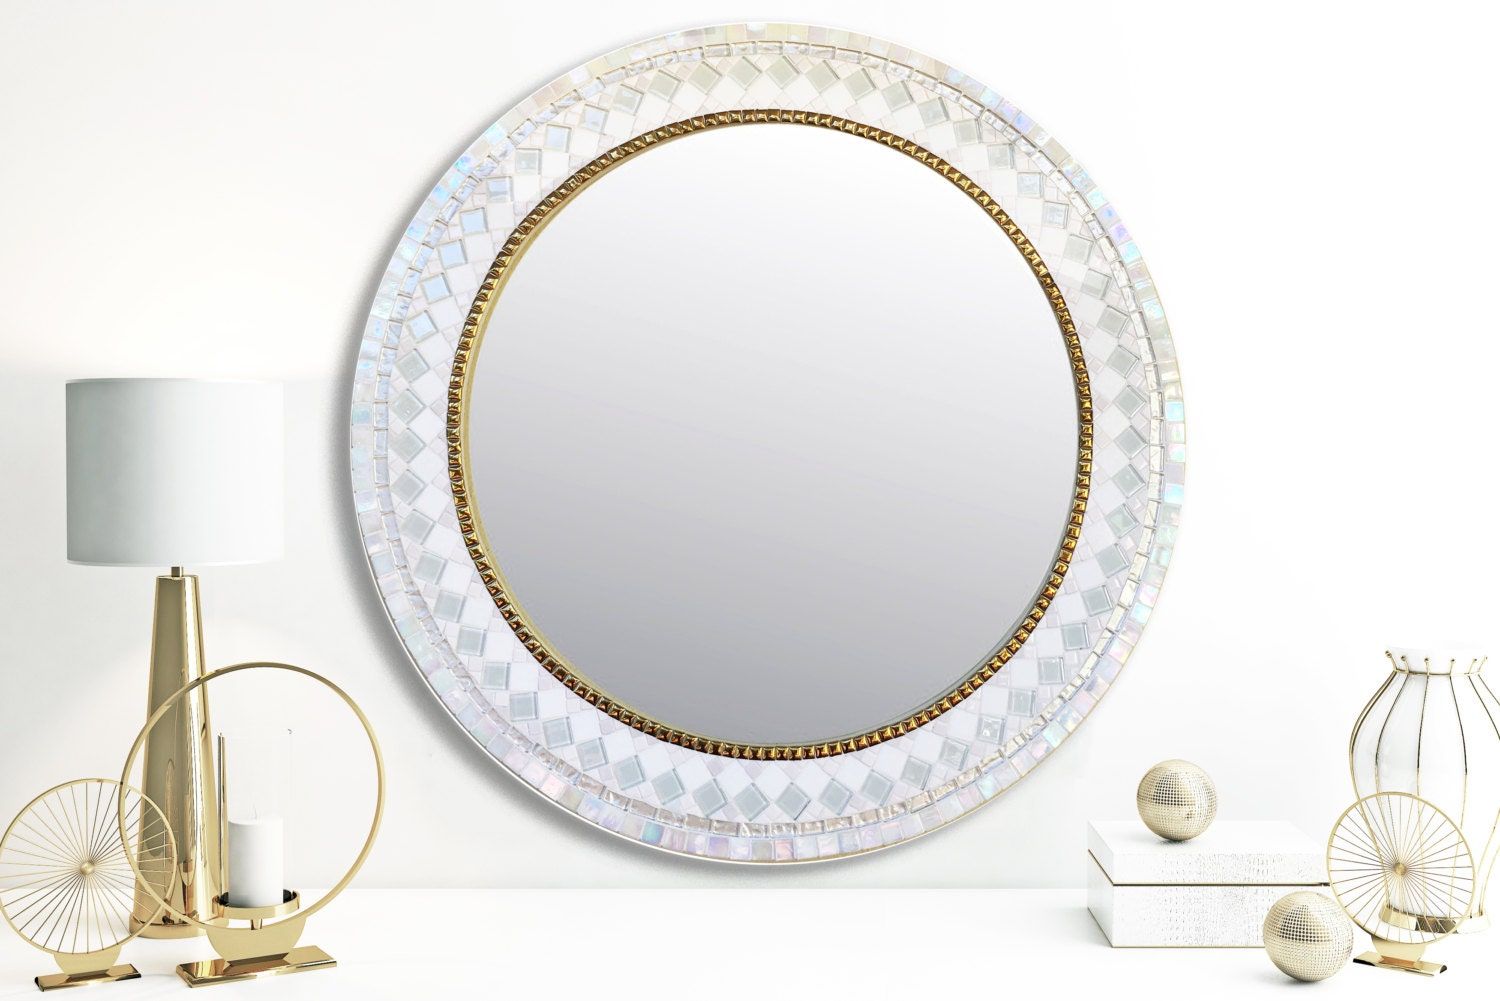 Mosaic Mirror Round Wall Mirror White And Gold Mosaic Throughout Gold Black Rounded Edge Wall Mirrors (View 2 of 15)